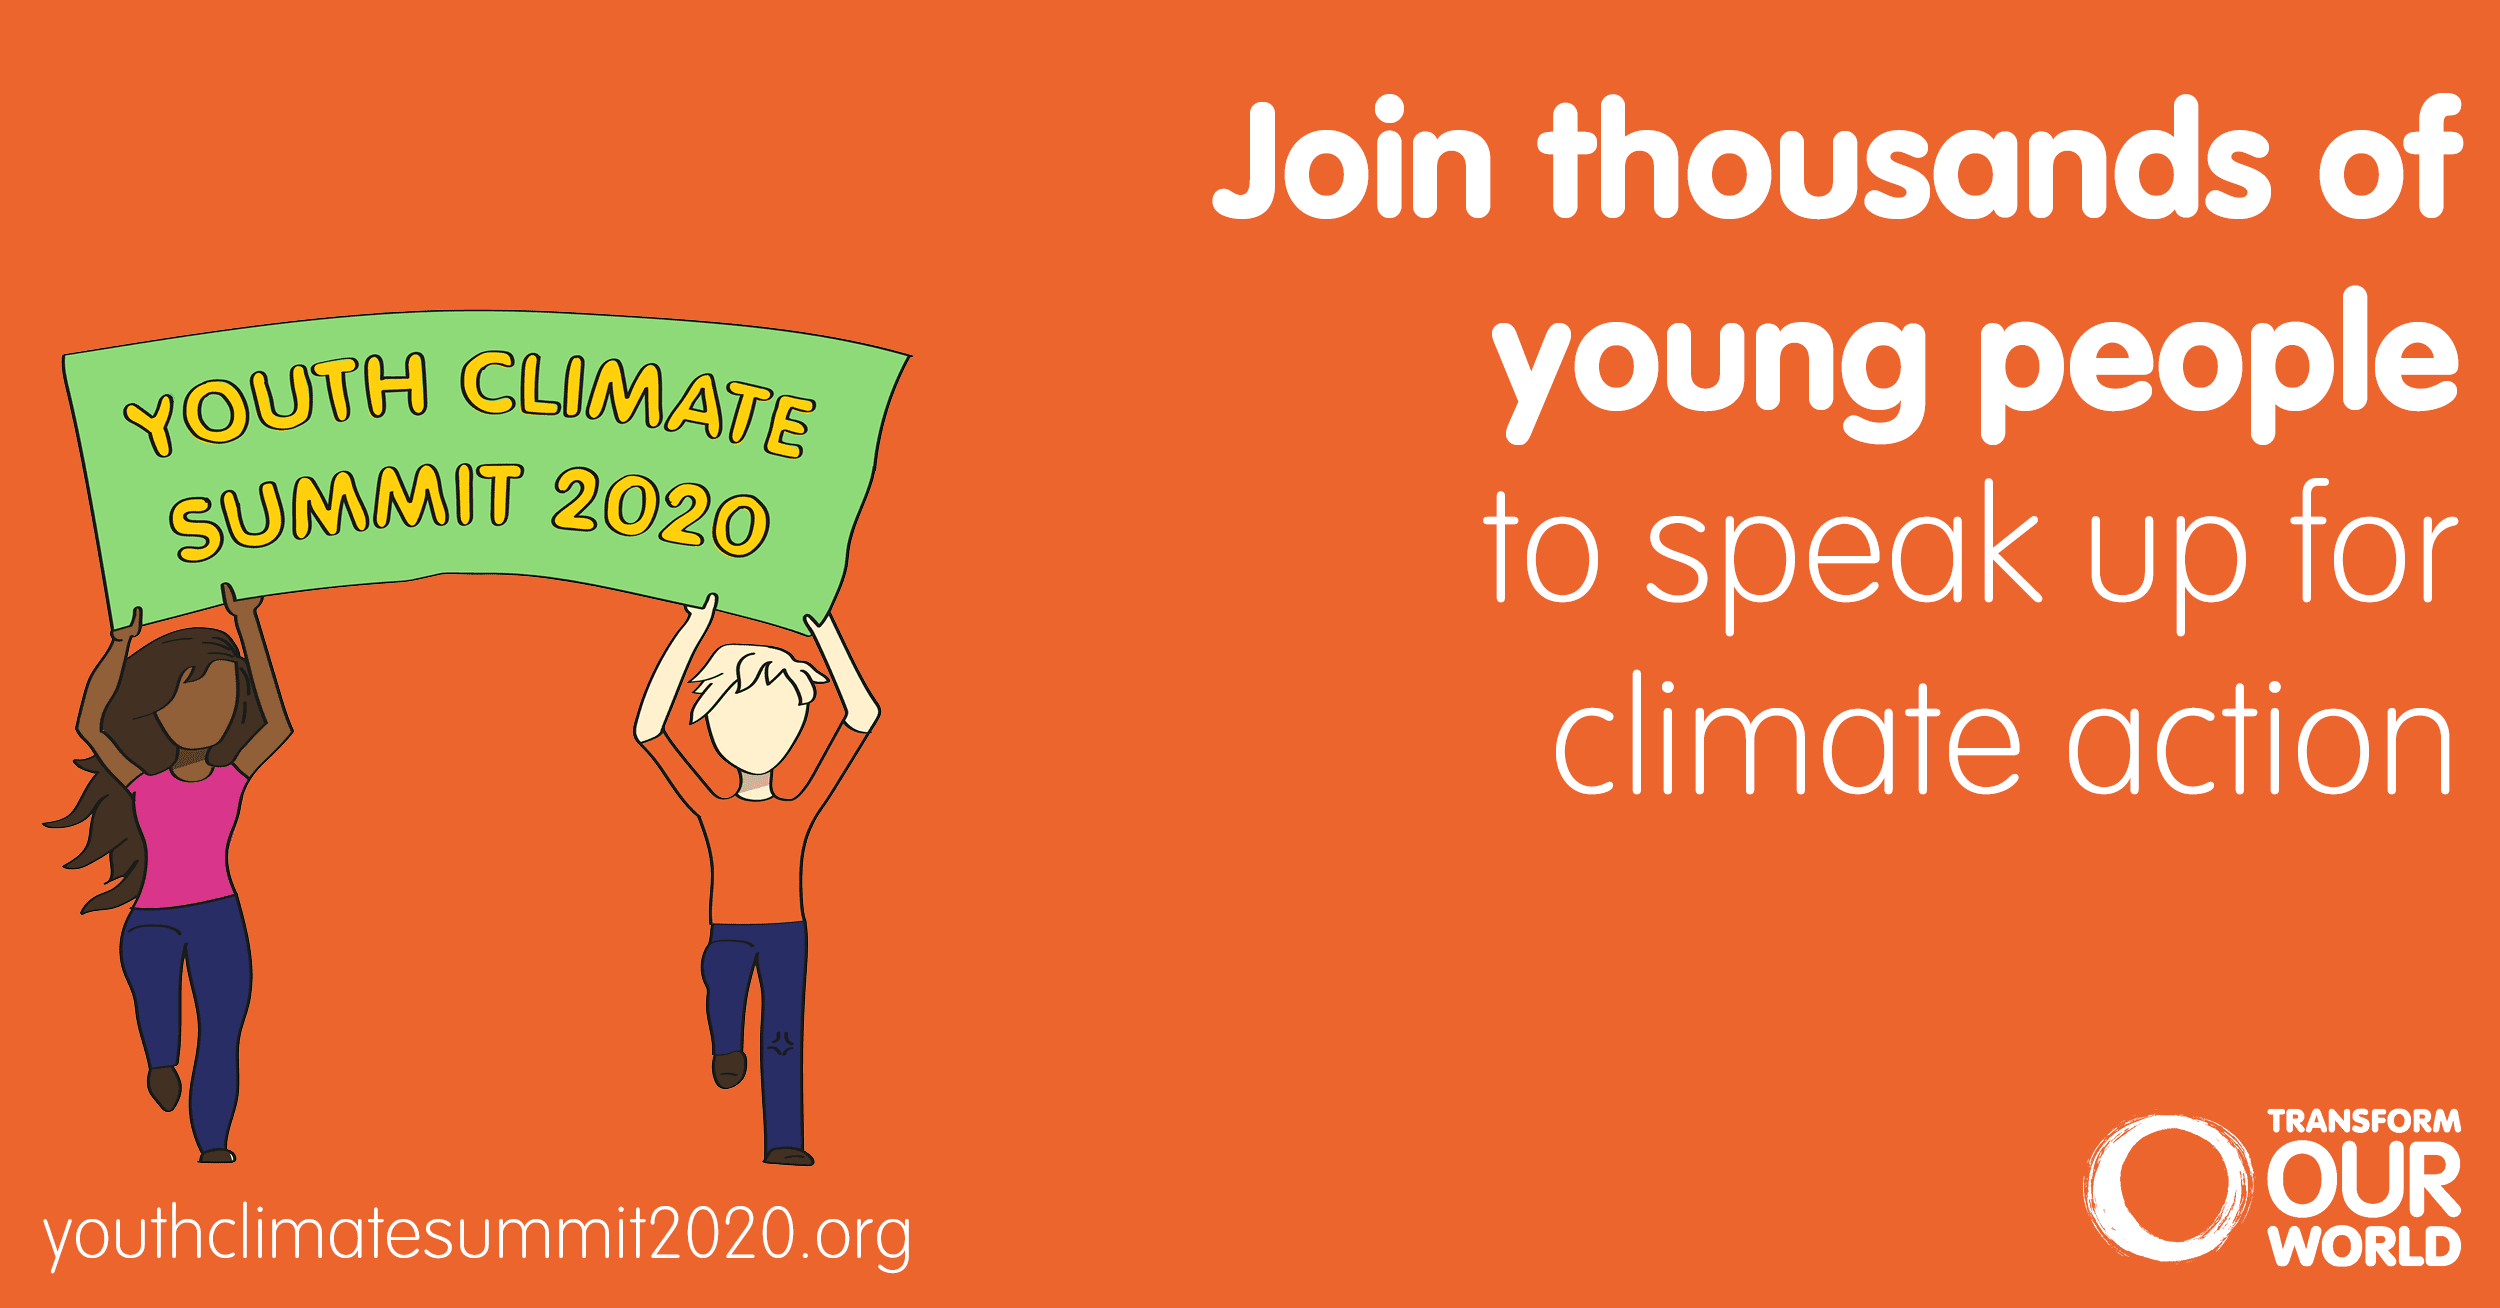 Join thousands of young people to speak up for climate action - Youth Climate Summit